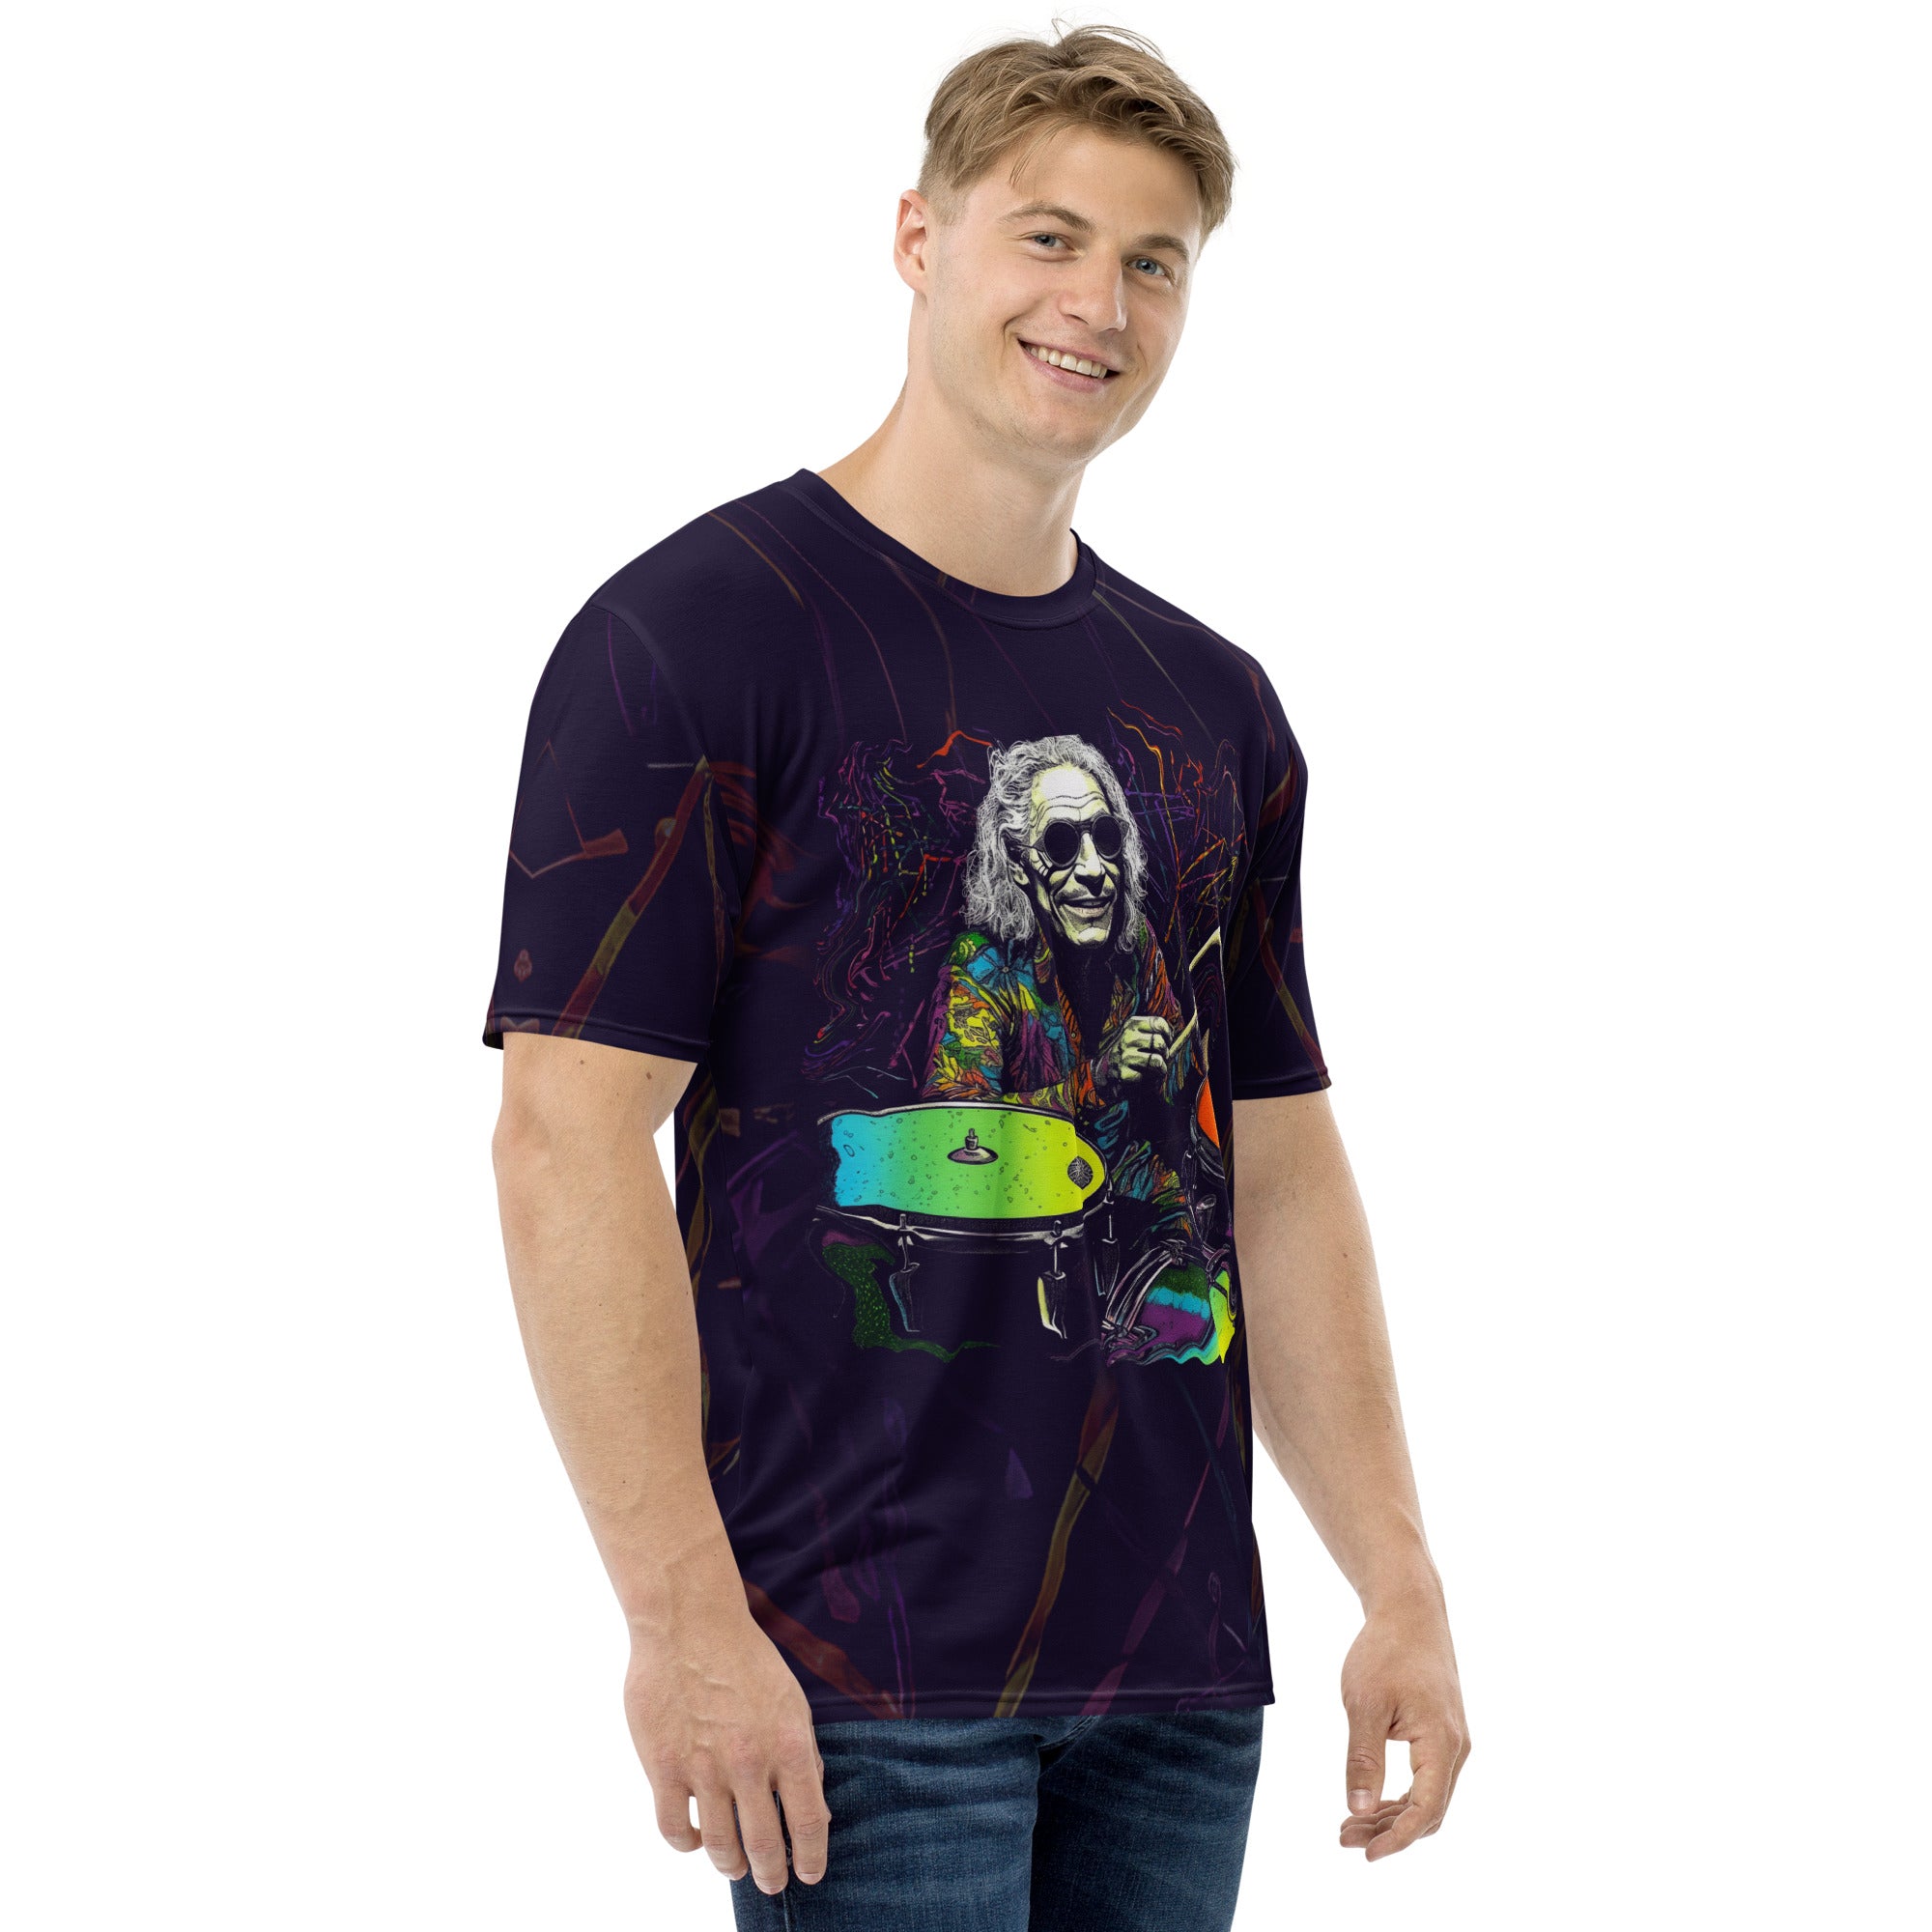 Floral Harmony Men's Crew Neck T-Shirt on a clothing rack.